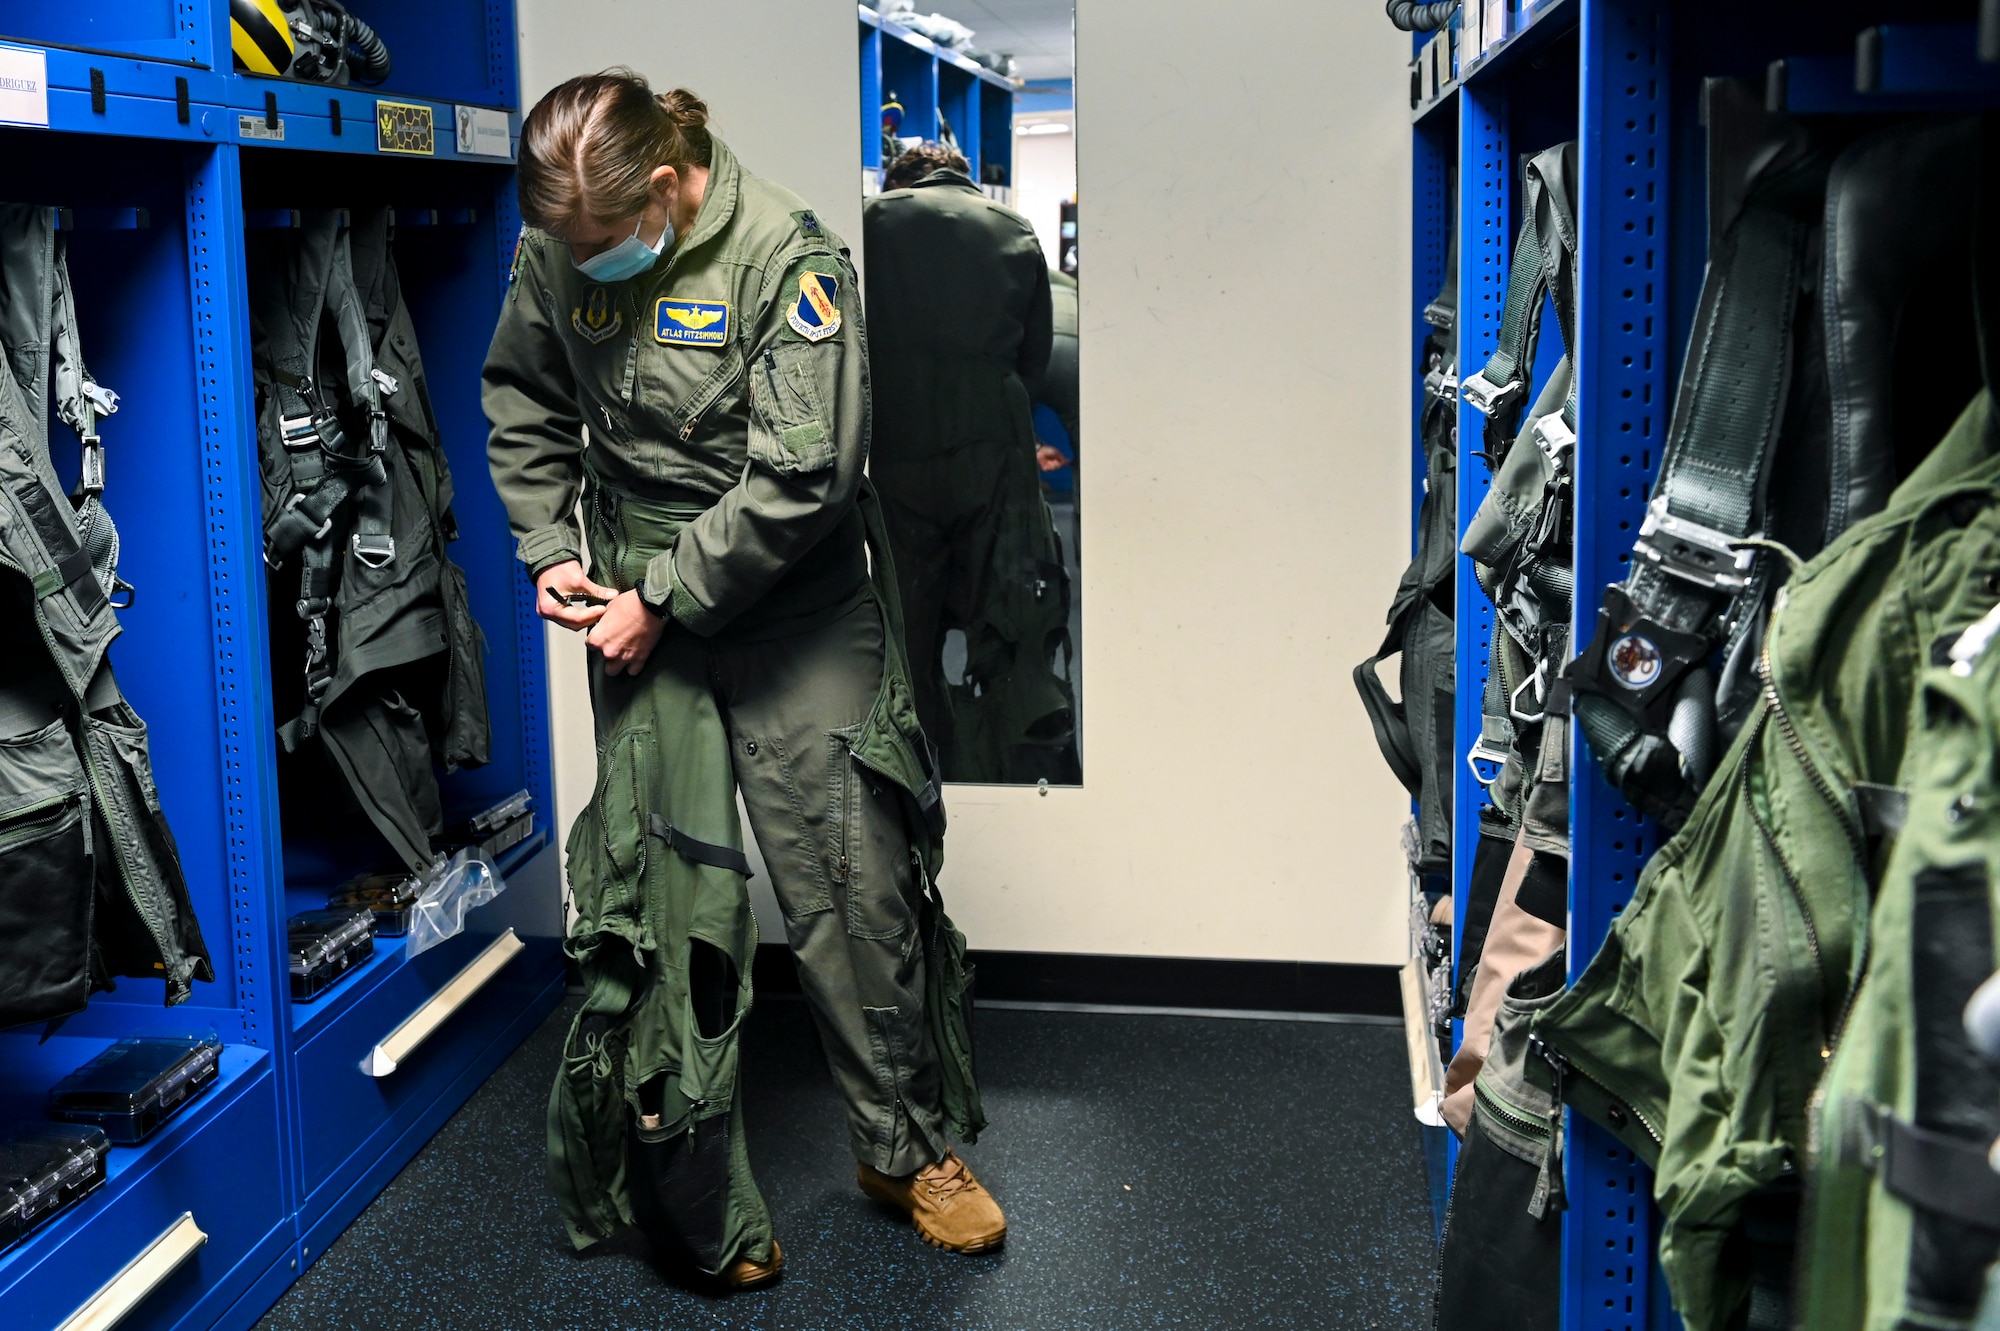 Lt. Col. Bridgett “Atlas” Fitzsimmons, 334th Fighter Squadron director of operations, suits up before a flight at Seymour Johnson Air Force Base, North Carolina, Jan. 5, 2022.